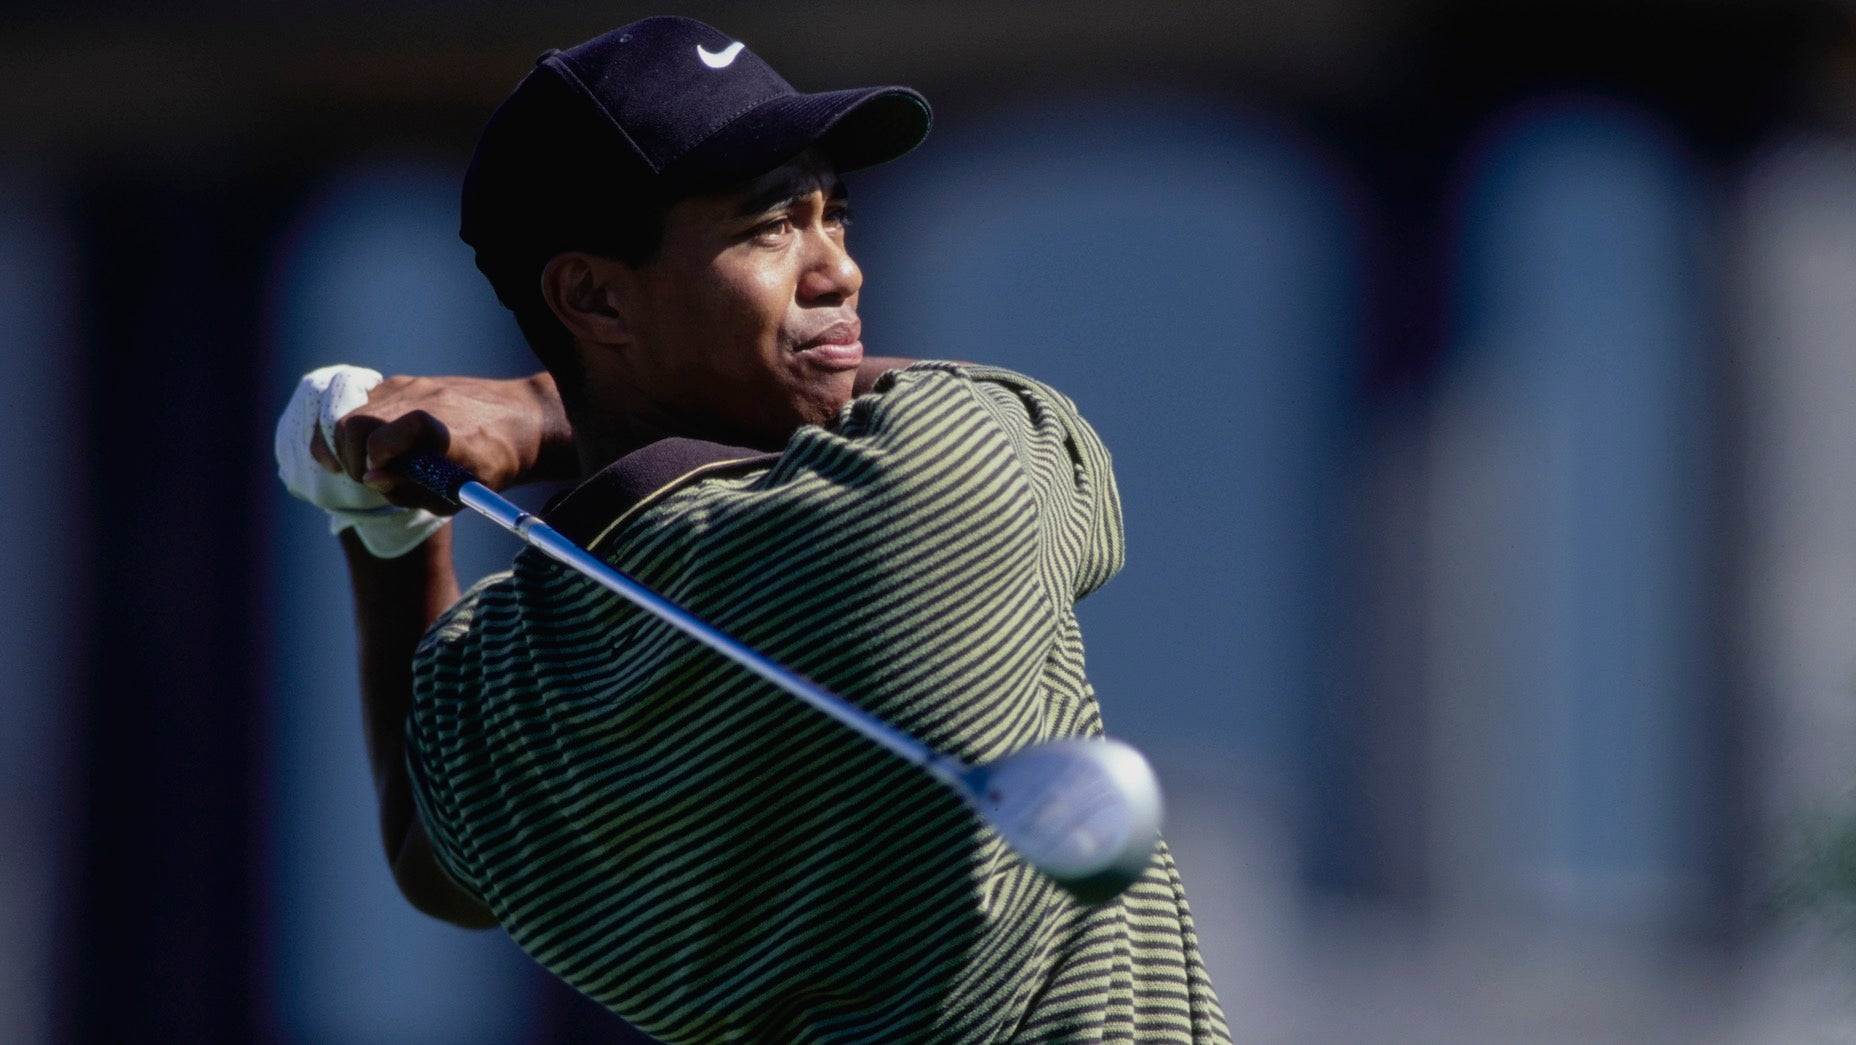 Tiger Woods’ 7 best Nike Golf commercials over the years